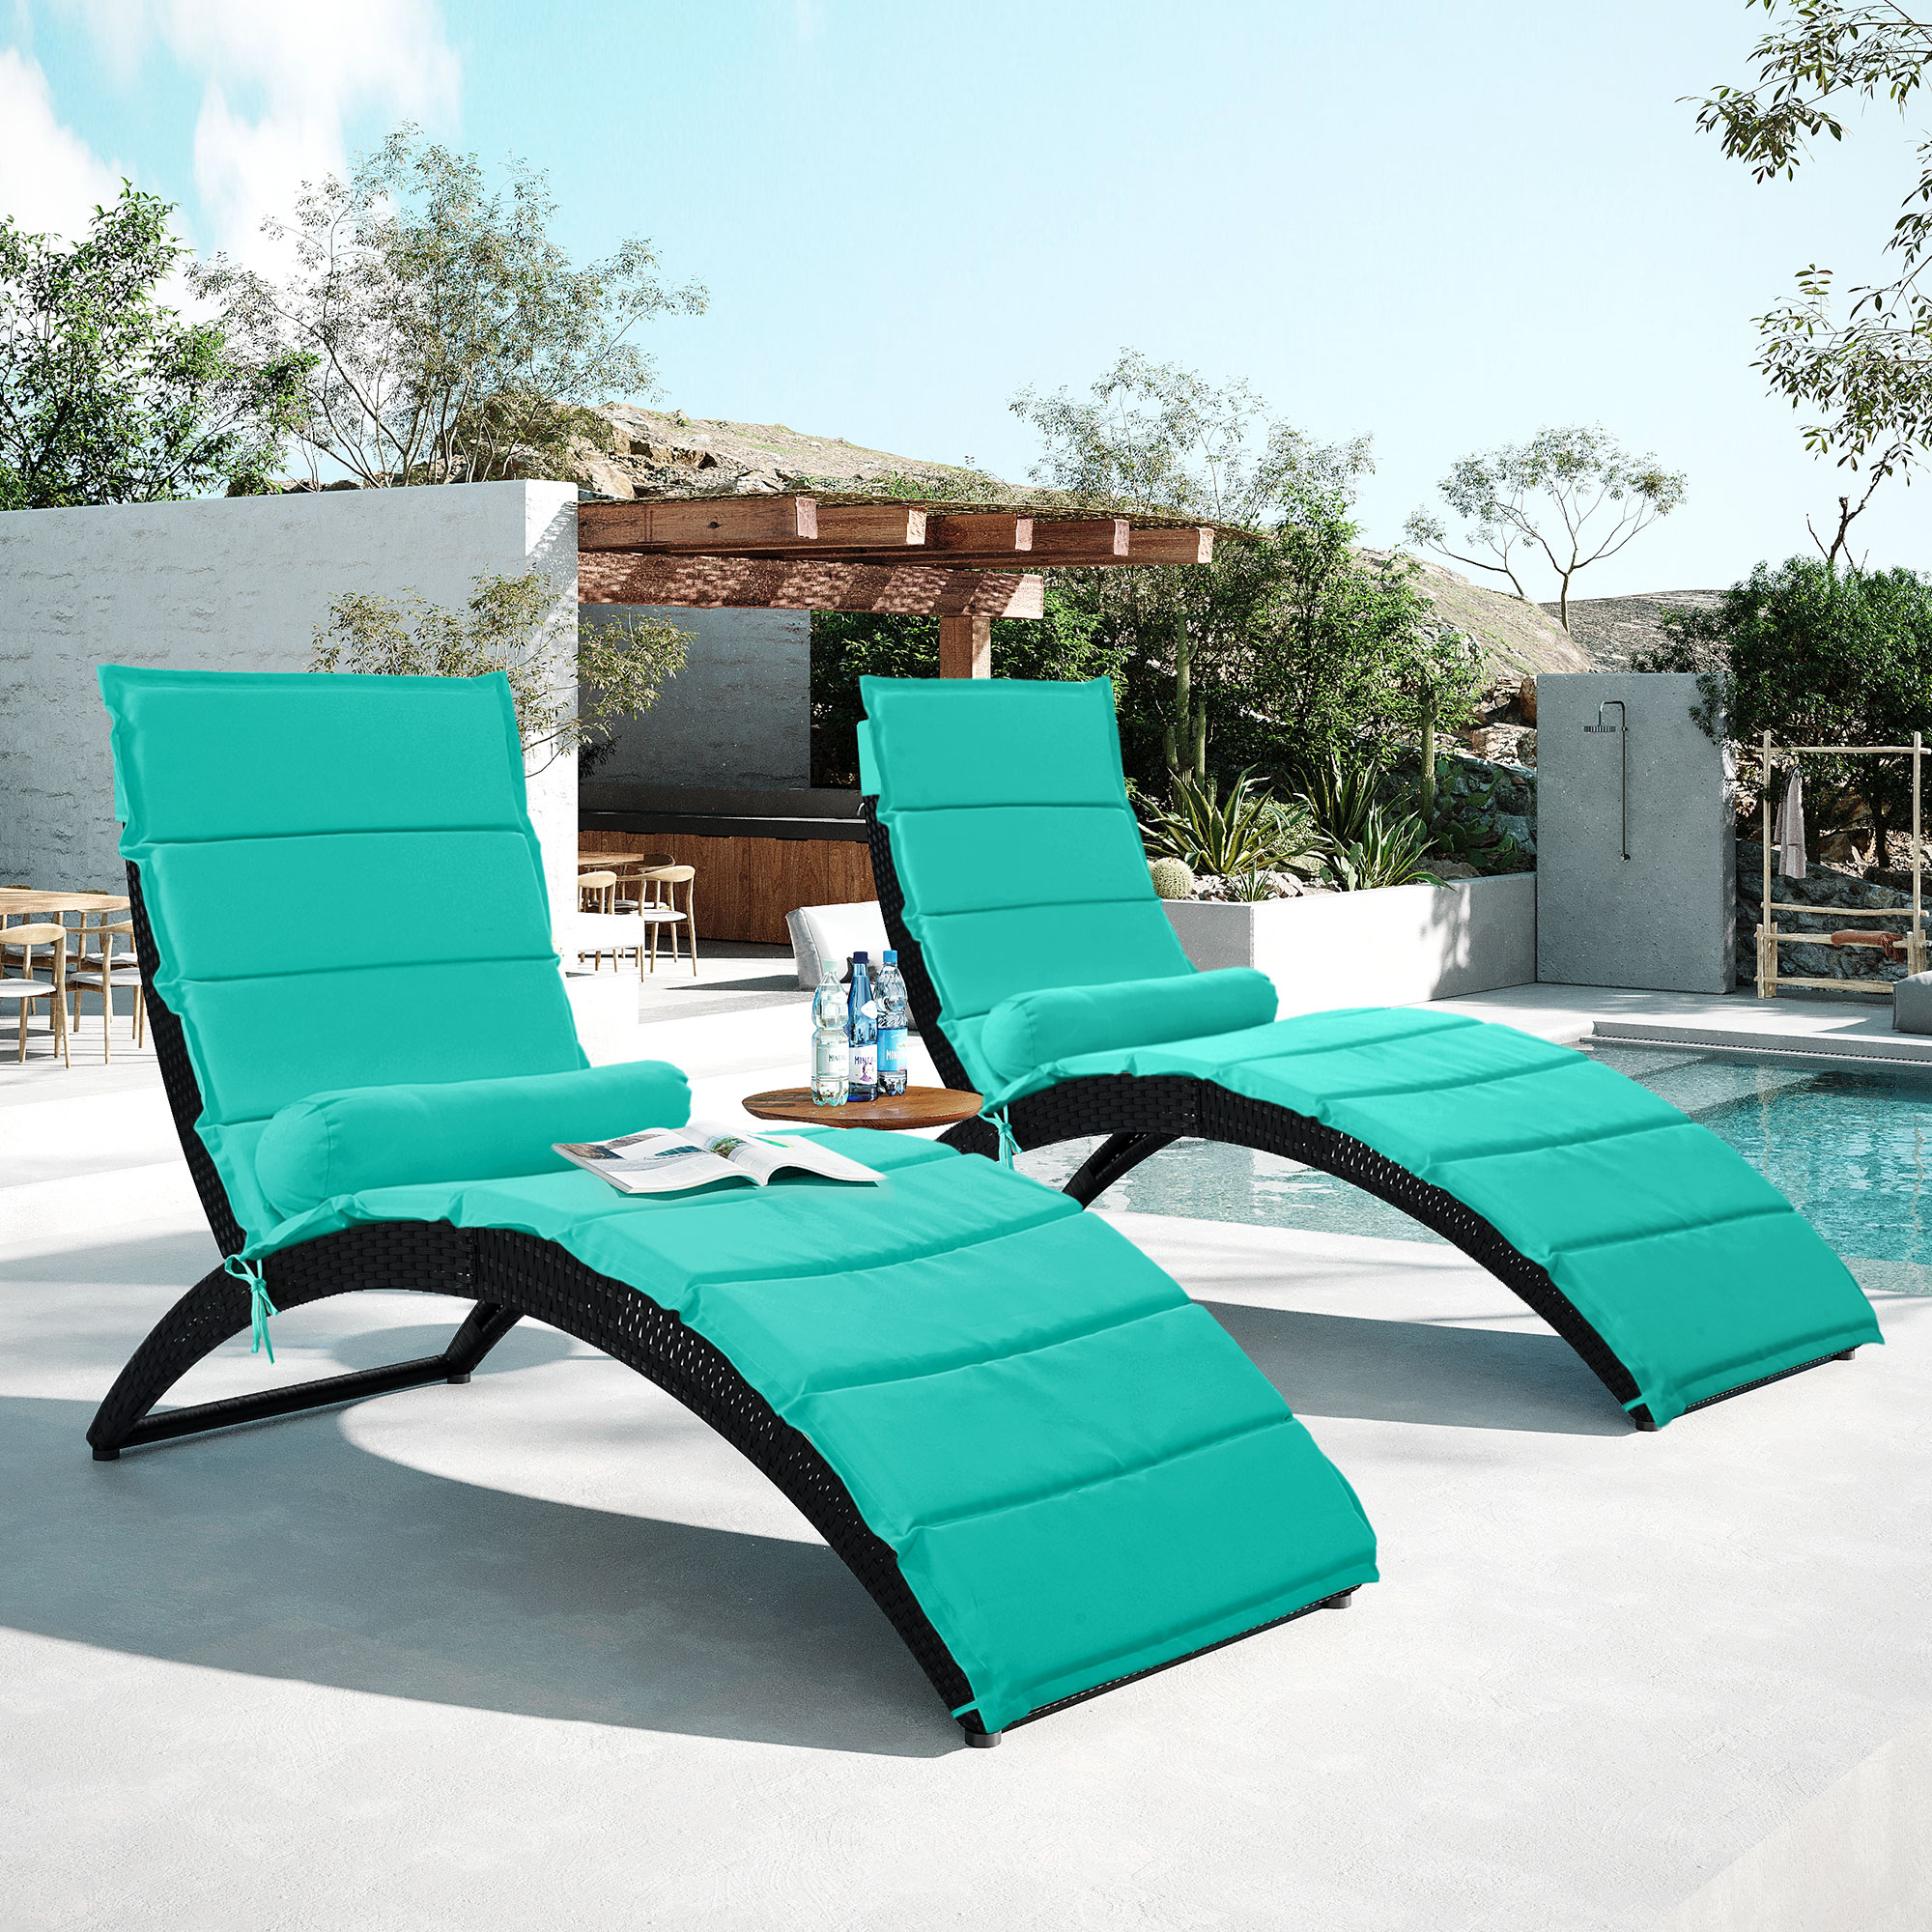 SYNGAR Chaise Lounge Chairs for Outside 2 Pieces, Patio Foldable Lounge Chairs Set of 2, Outdoor Rattan Wicker Pool Chaise Lounge Chairs Cushioned Poolside Chaise Lounge Set, Blue - image 2 of 10